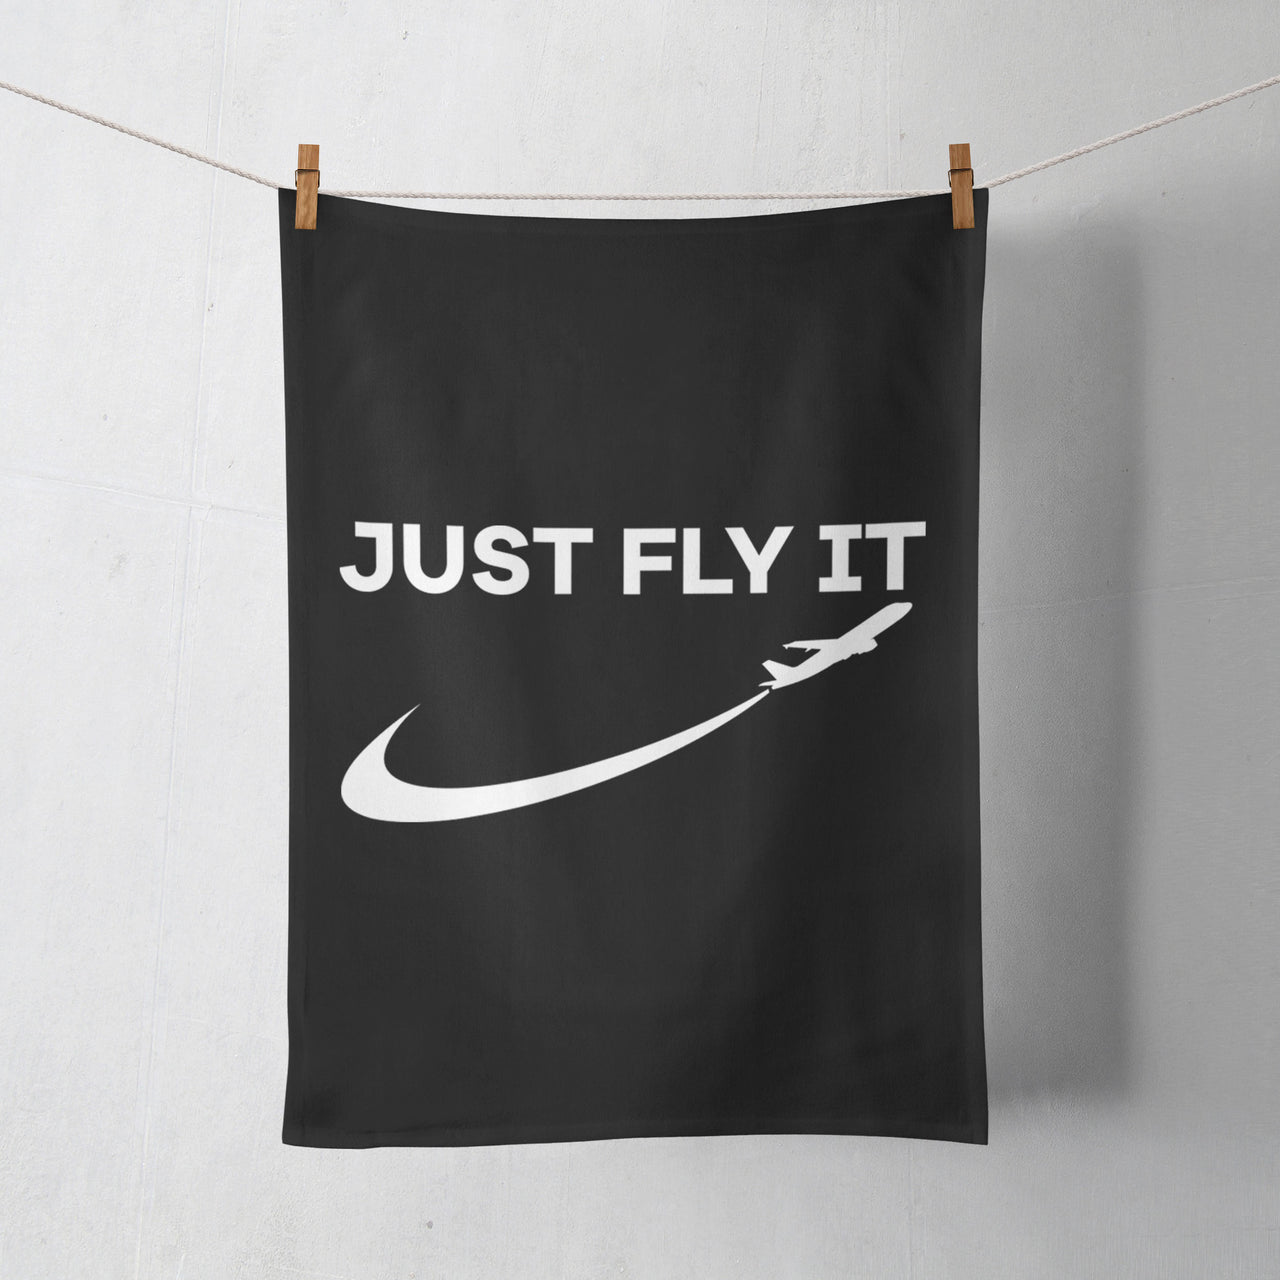 Just Fly It 2 Designed Towels